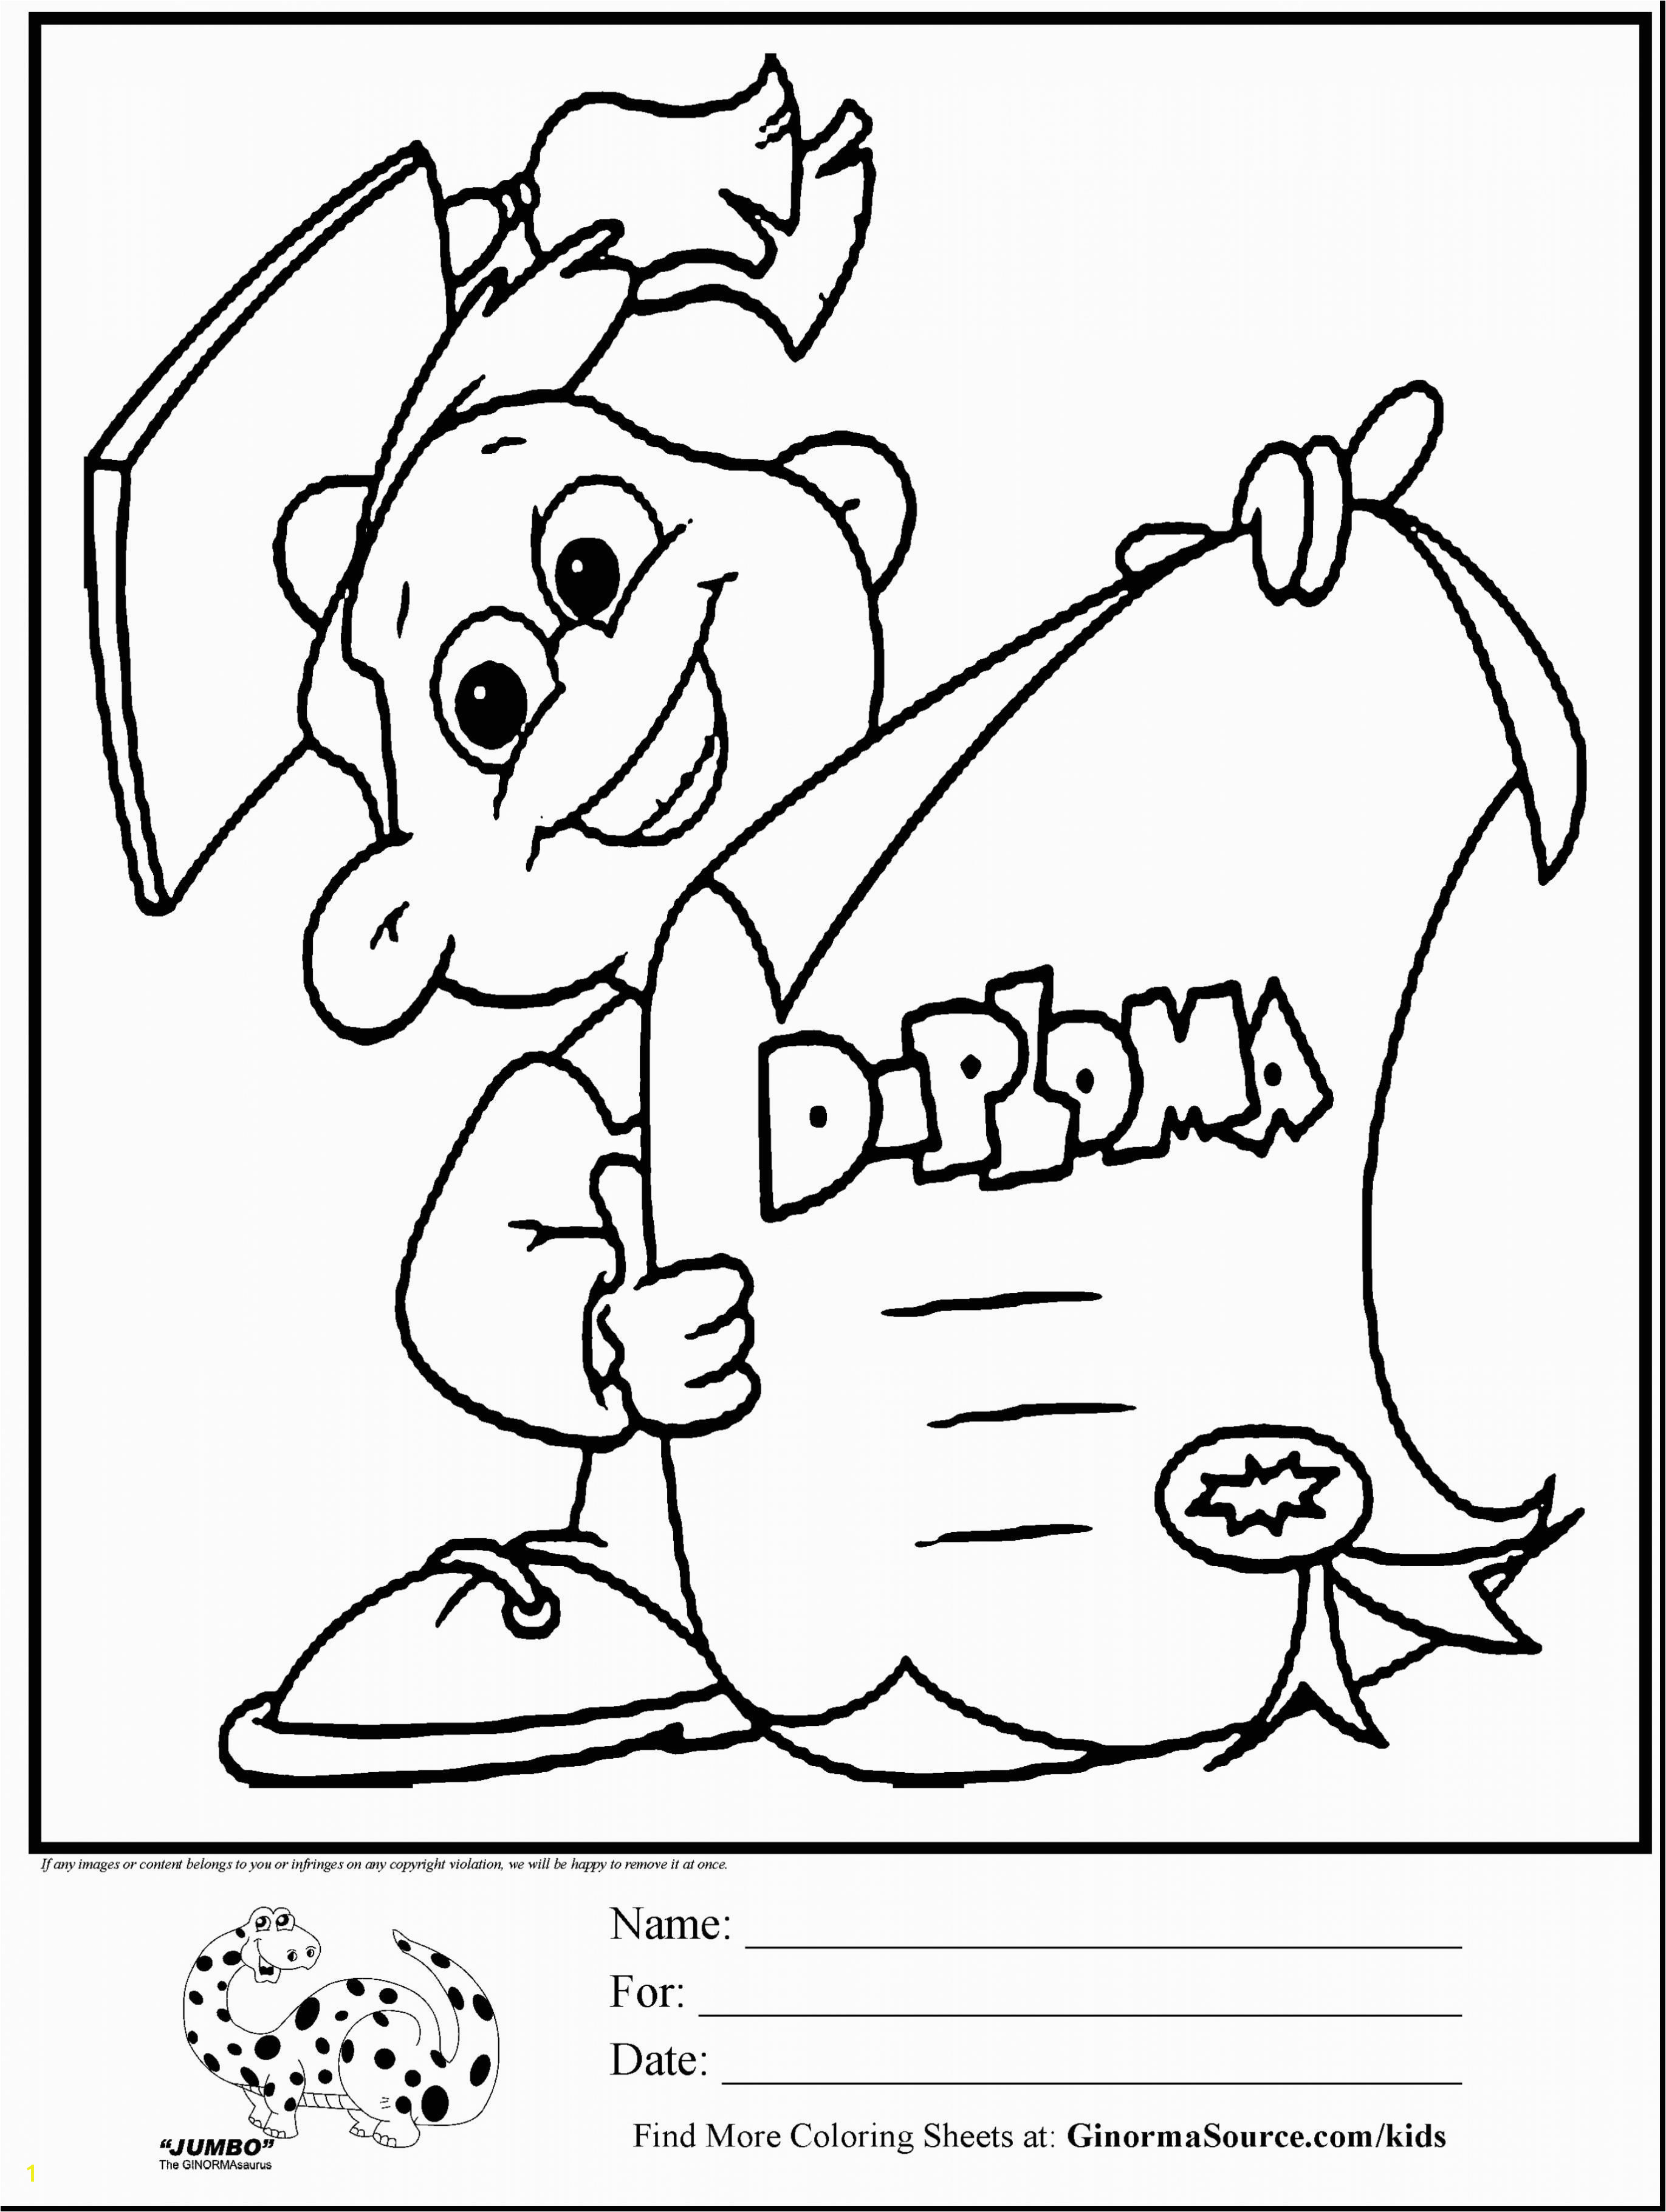 Coloring College Graduation Coloring Page For Preschool Pages on Fancy Coloring Pages For Toddlers with Additional Line Drawings Fabulous Kindergarten